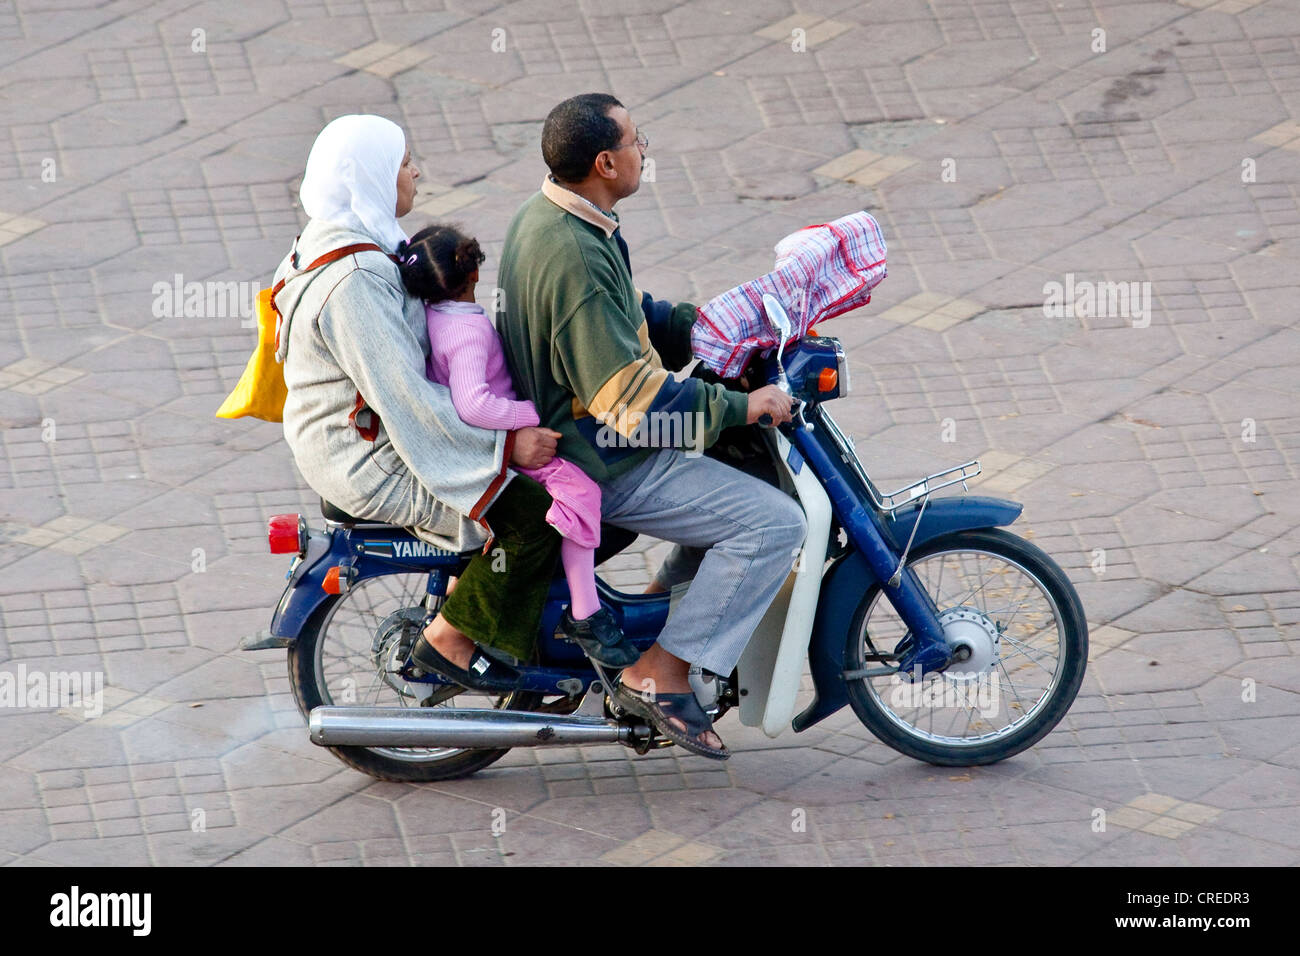 Family riding a moped in Djemaa el Fna square, medina or old town, UNESCO World Heritage Site, Marrakech, Morocco, Africa Stock Photo